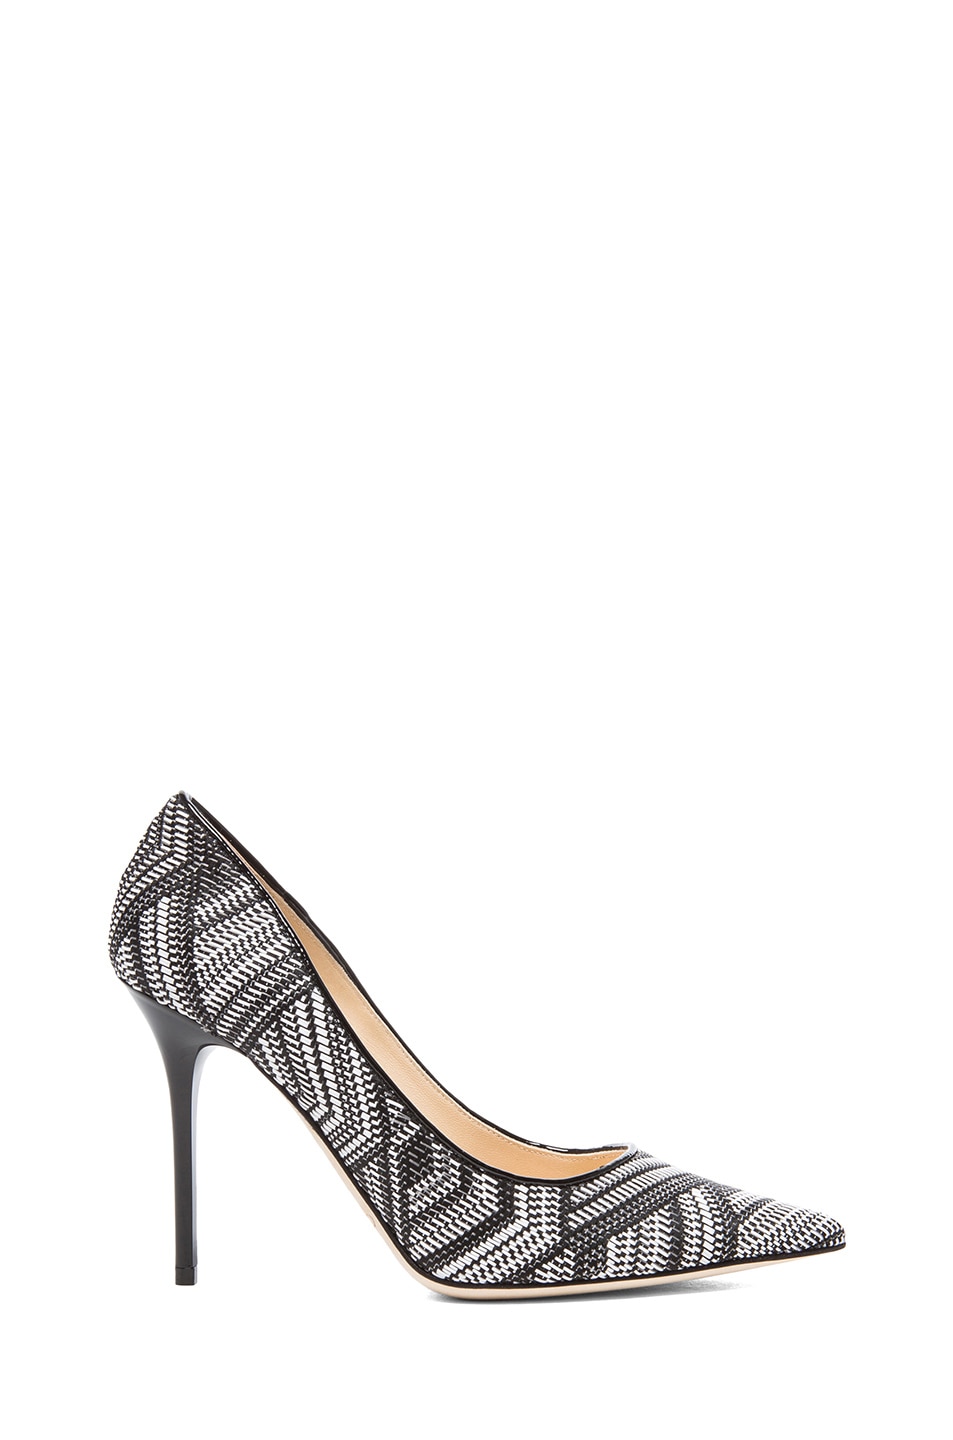 Image 1 of Jimmy Choo Abel Pointed Woven Fabric Pumps in Black & White